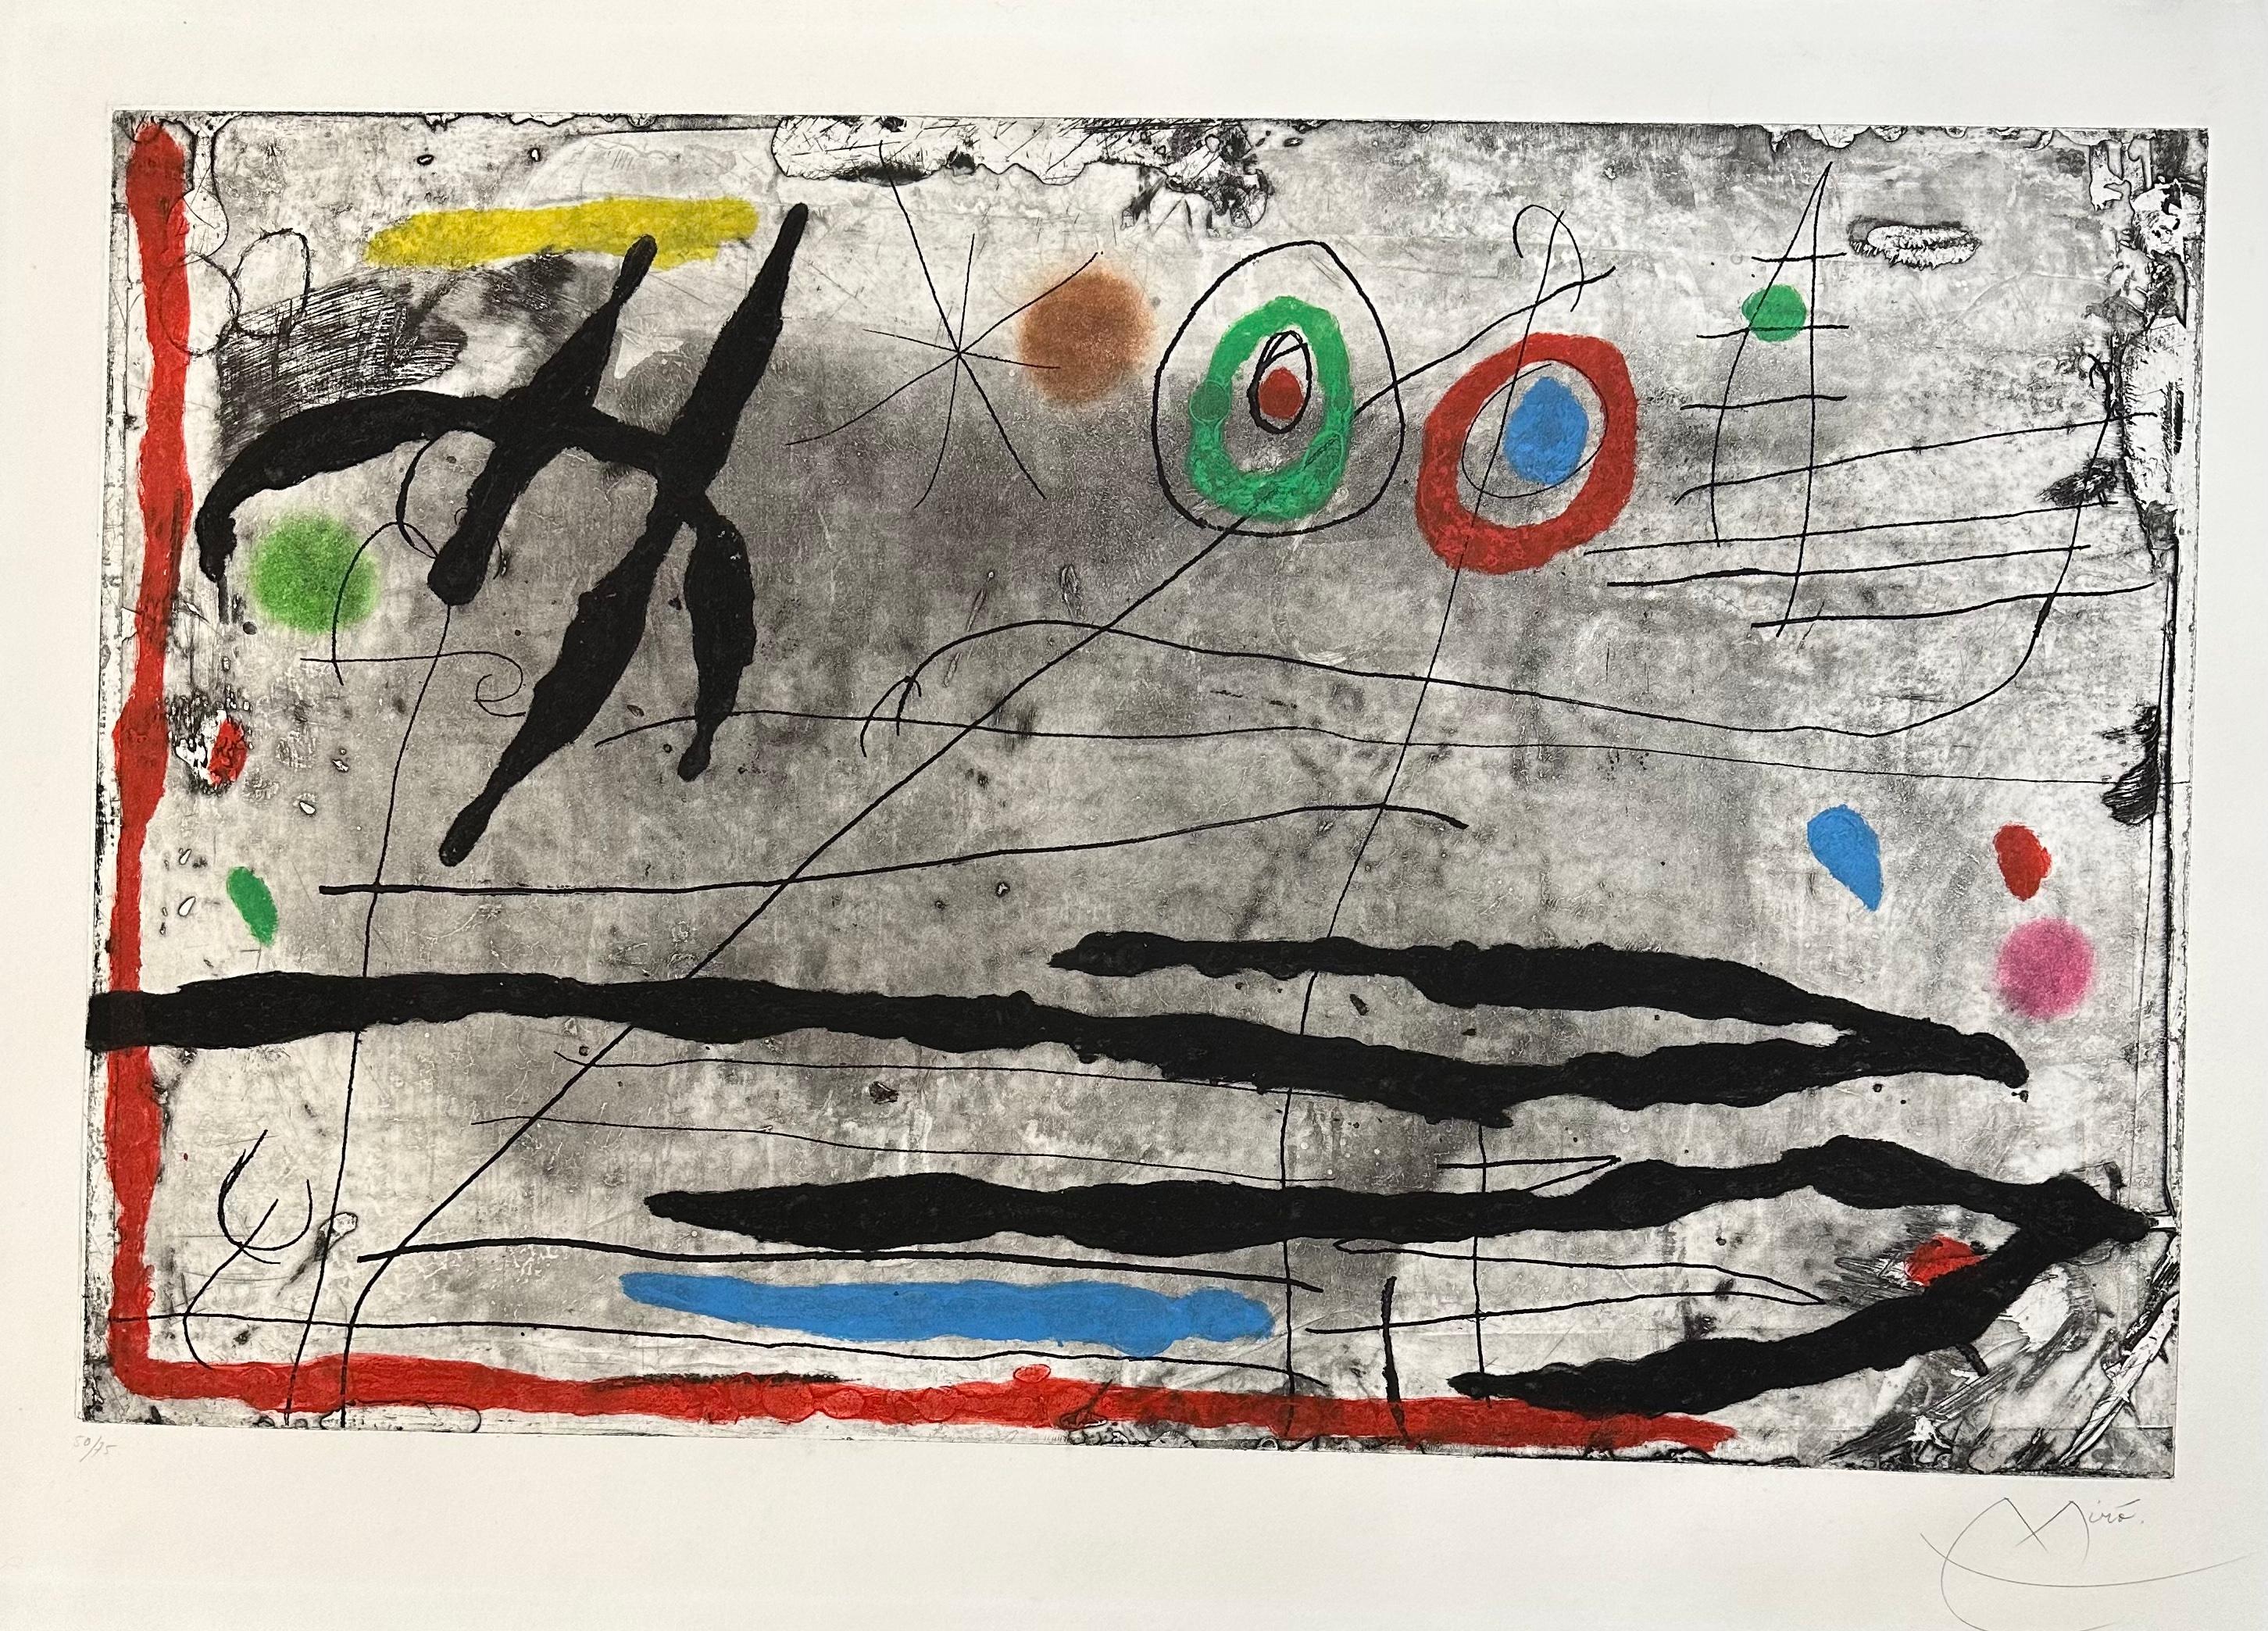 Joan Míro
Tracé sur la Paroi I
Original etching, aquatint and carborundum
1967
Hand signed in pencil, numbered 50/75 from the edition of 75 on Mandeure rag paper
Dupin 440
Image Size: 22.5 x 36 inches
Paper Size: 29 x 41 inches